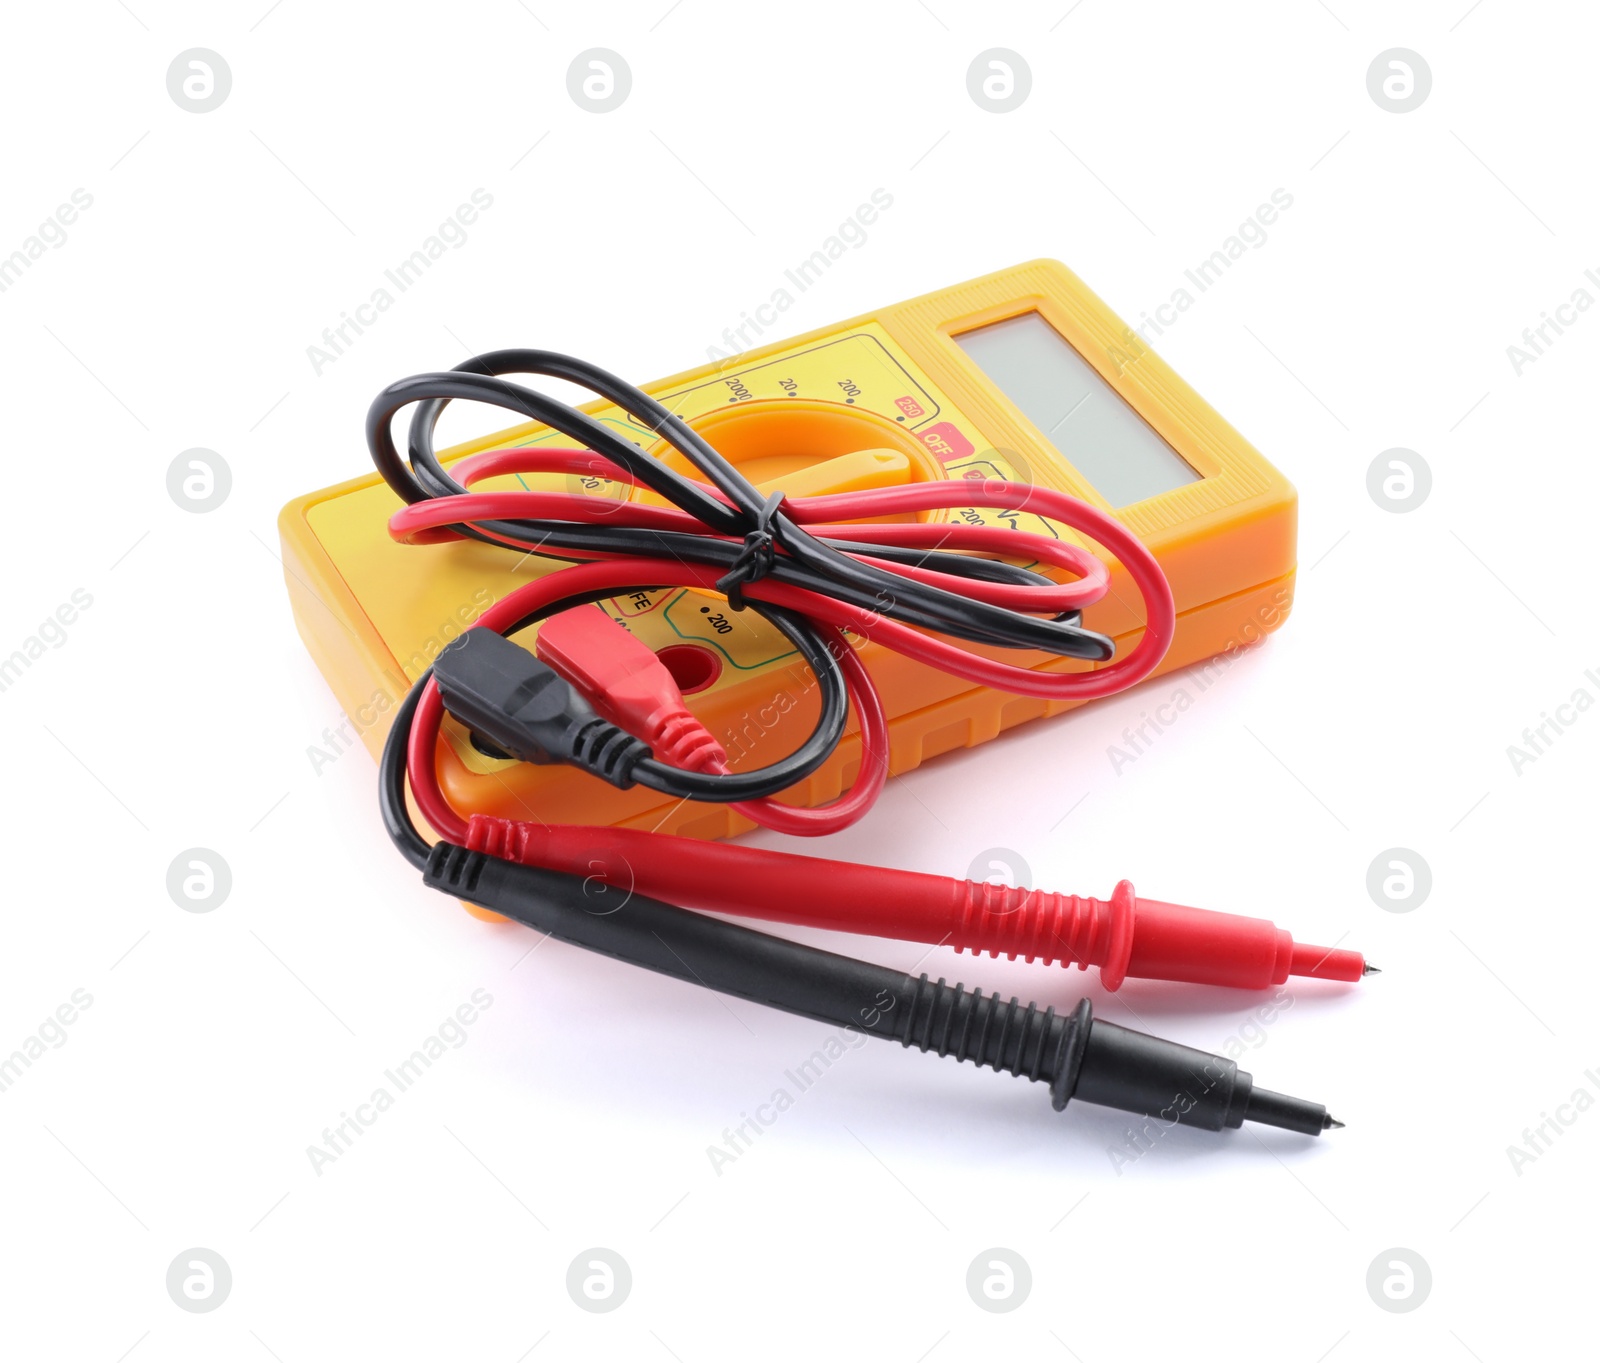 Photo of Digital multimeter on white background. Electrician's tool